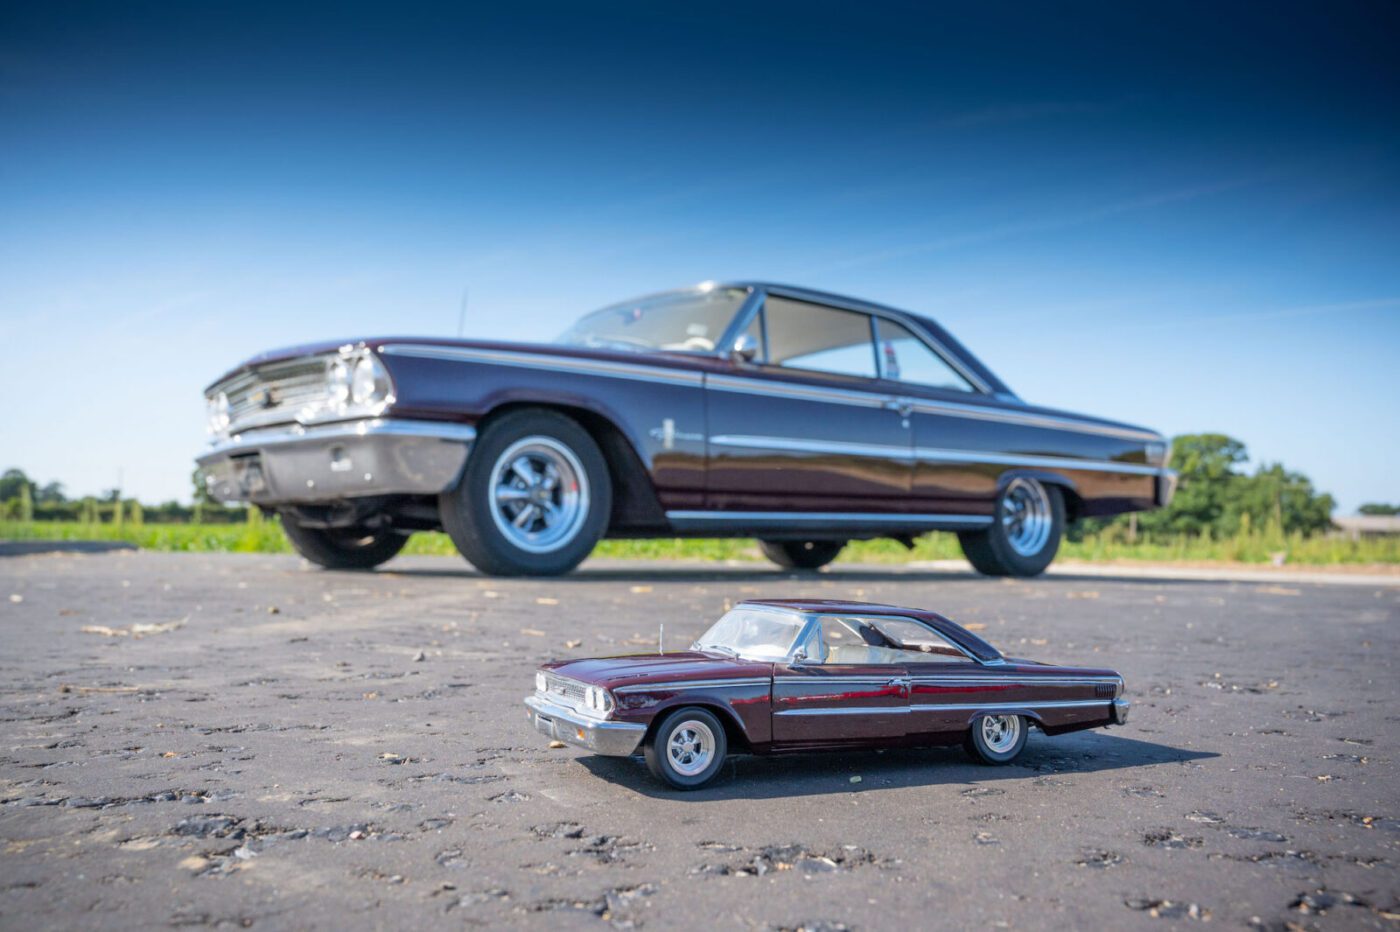 Ford Galaxie with model